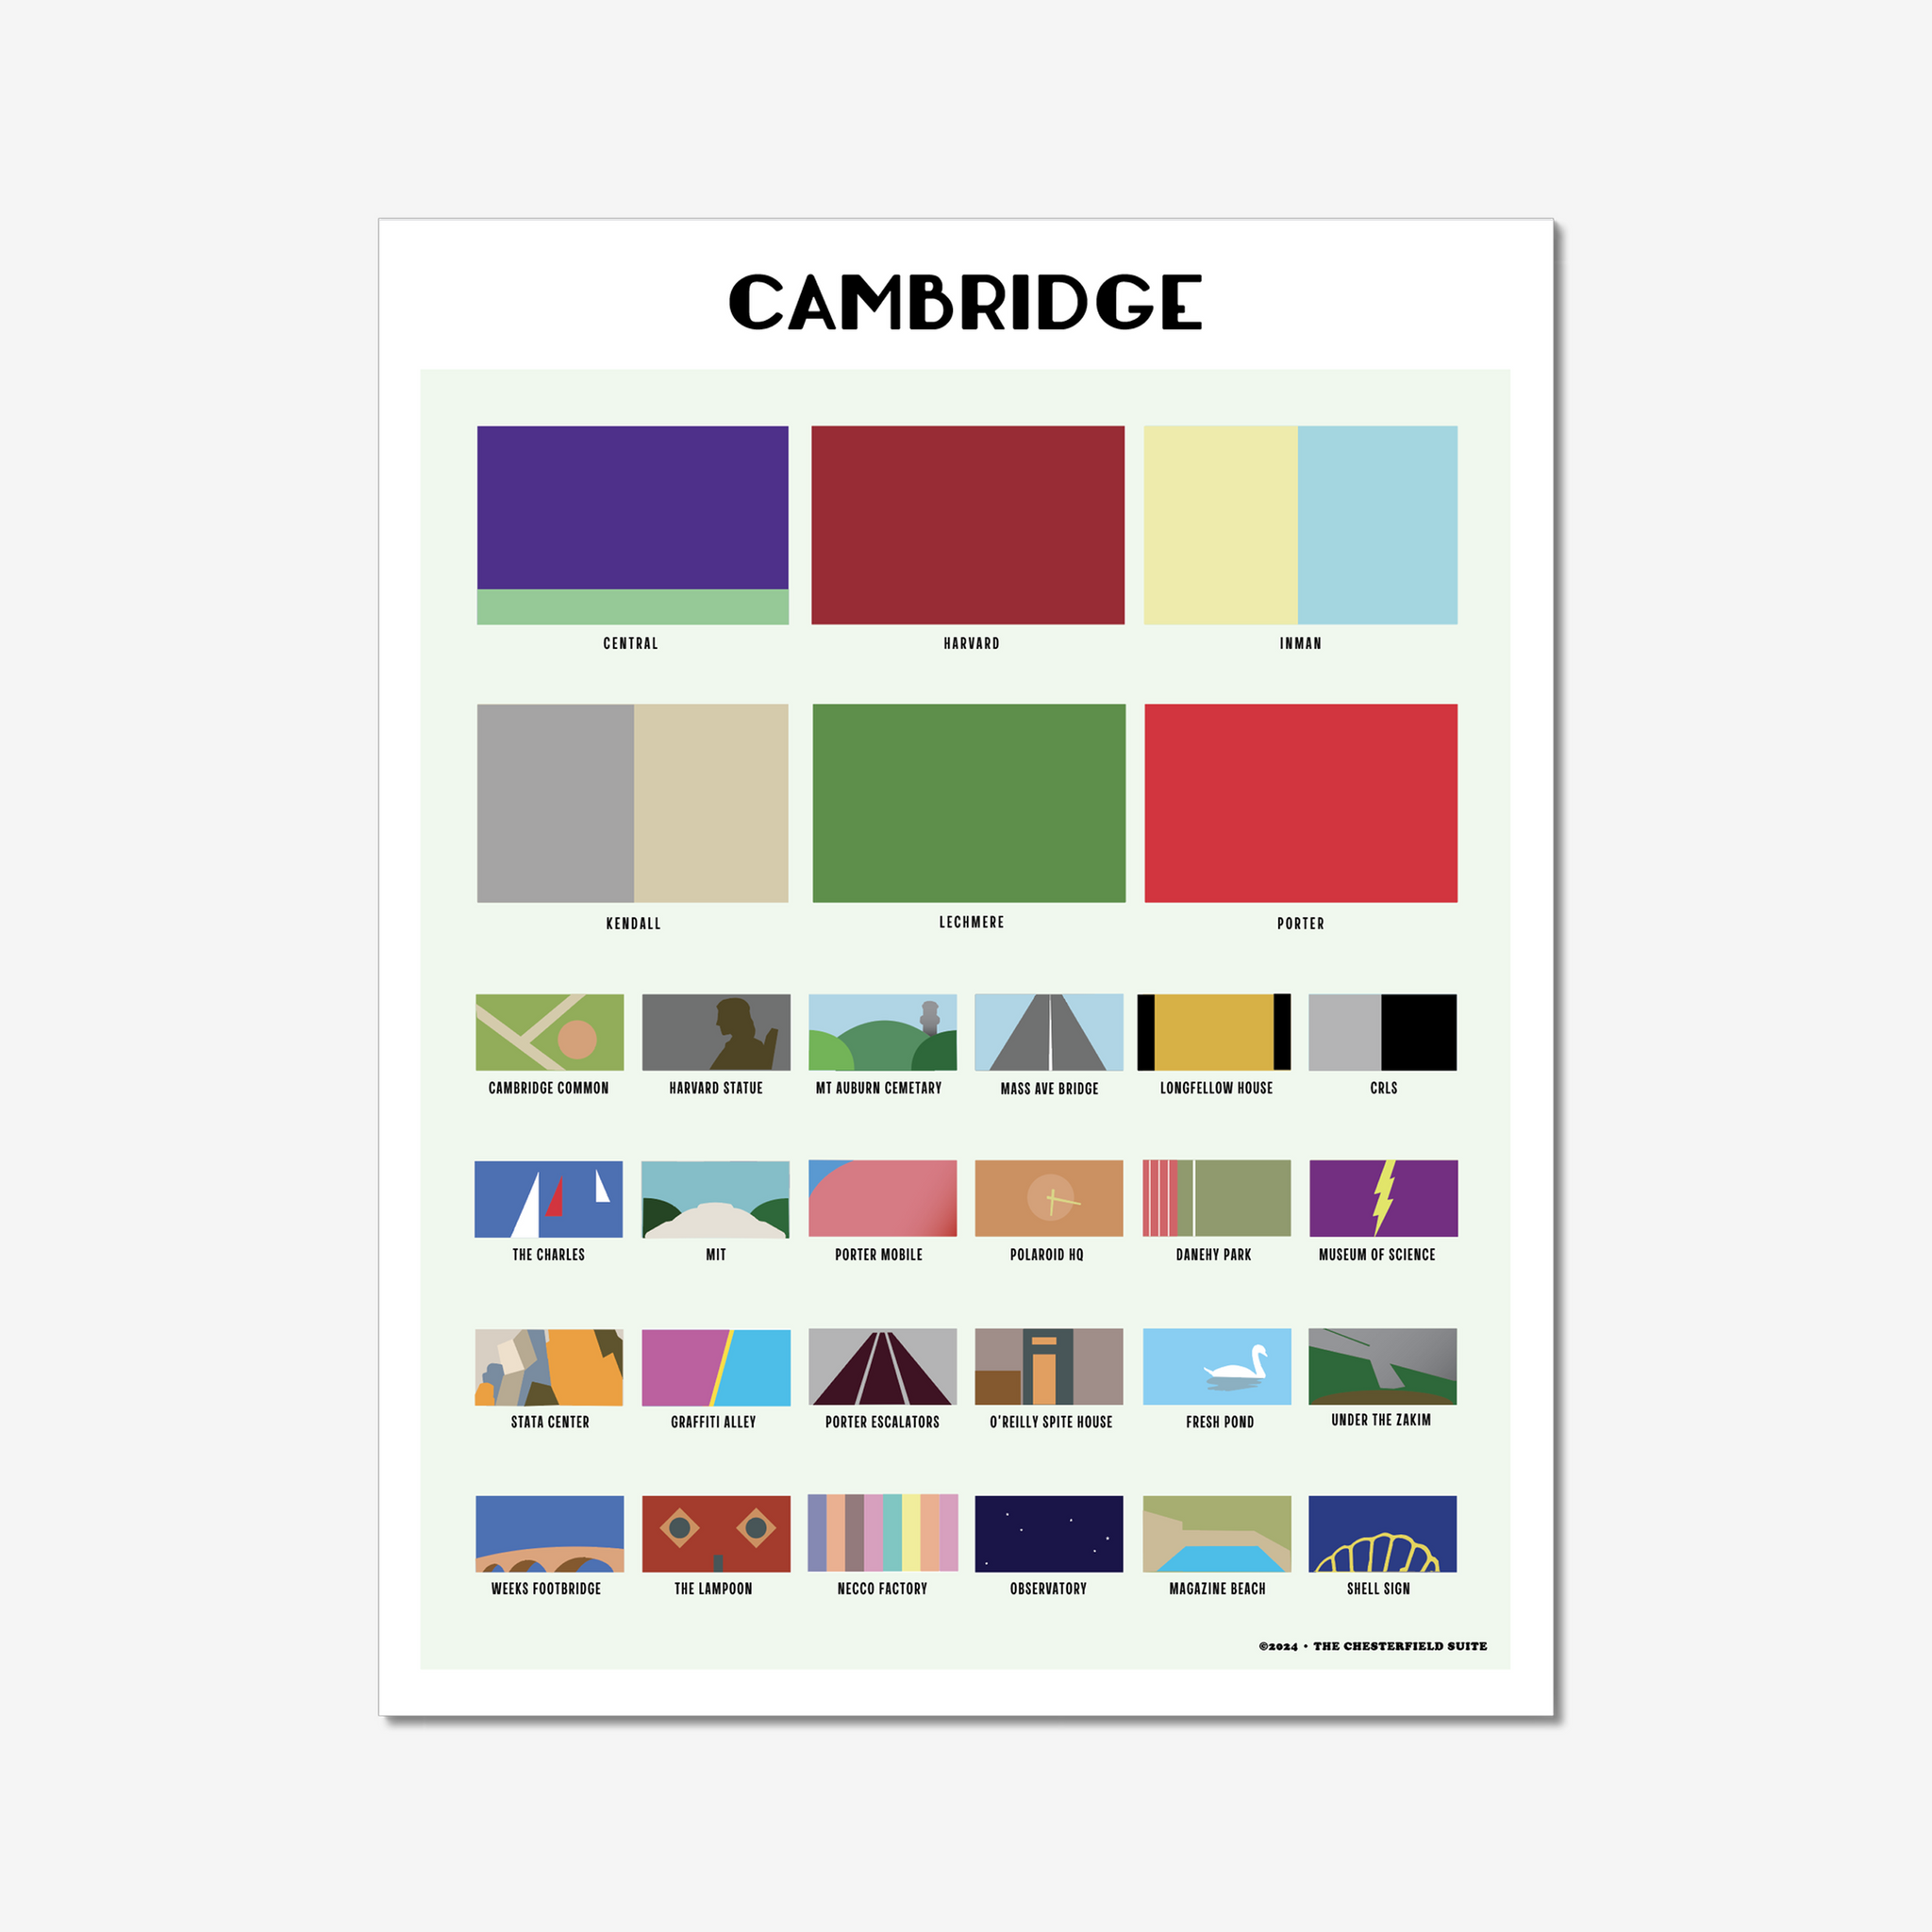 design of cambridge ma with blocks of color respresenting each neighborhood and attraction